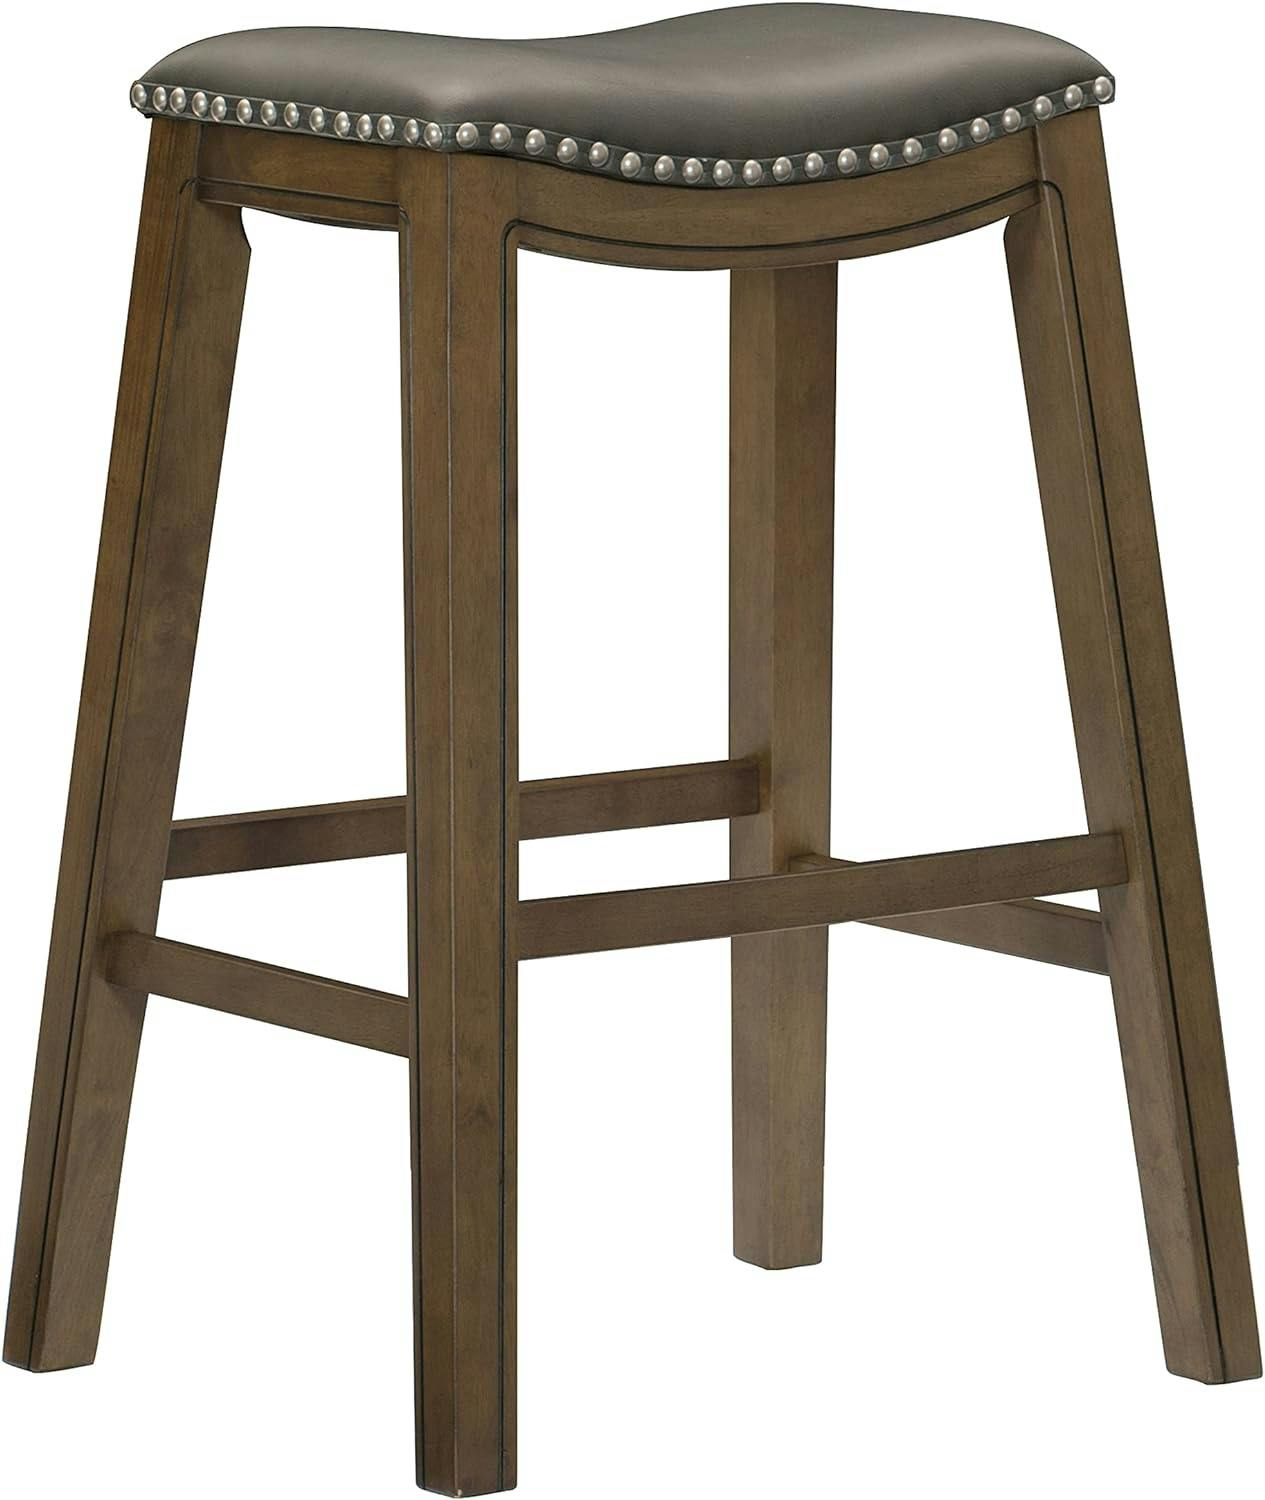 Contemporary Gray Wood Saddle Style Pub Stool, 31" Height